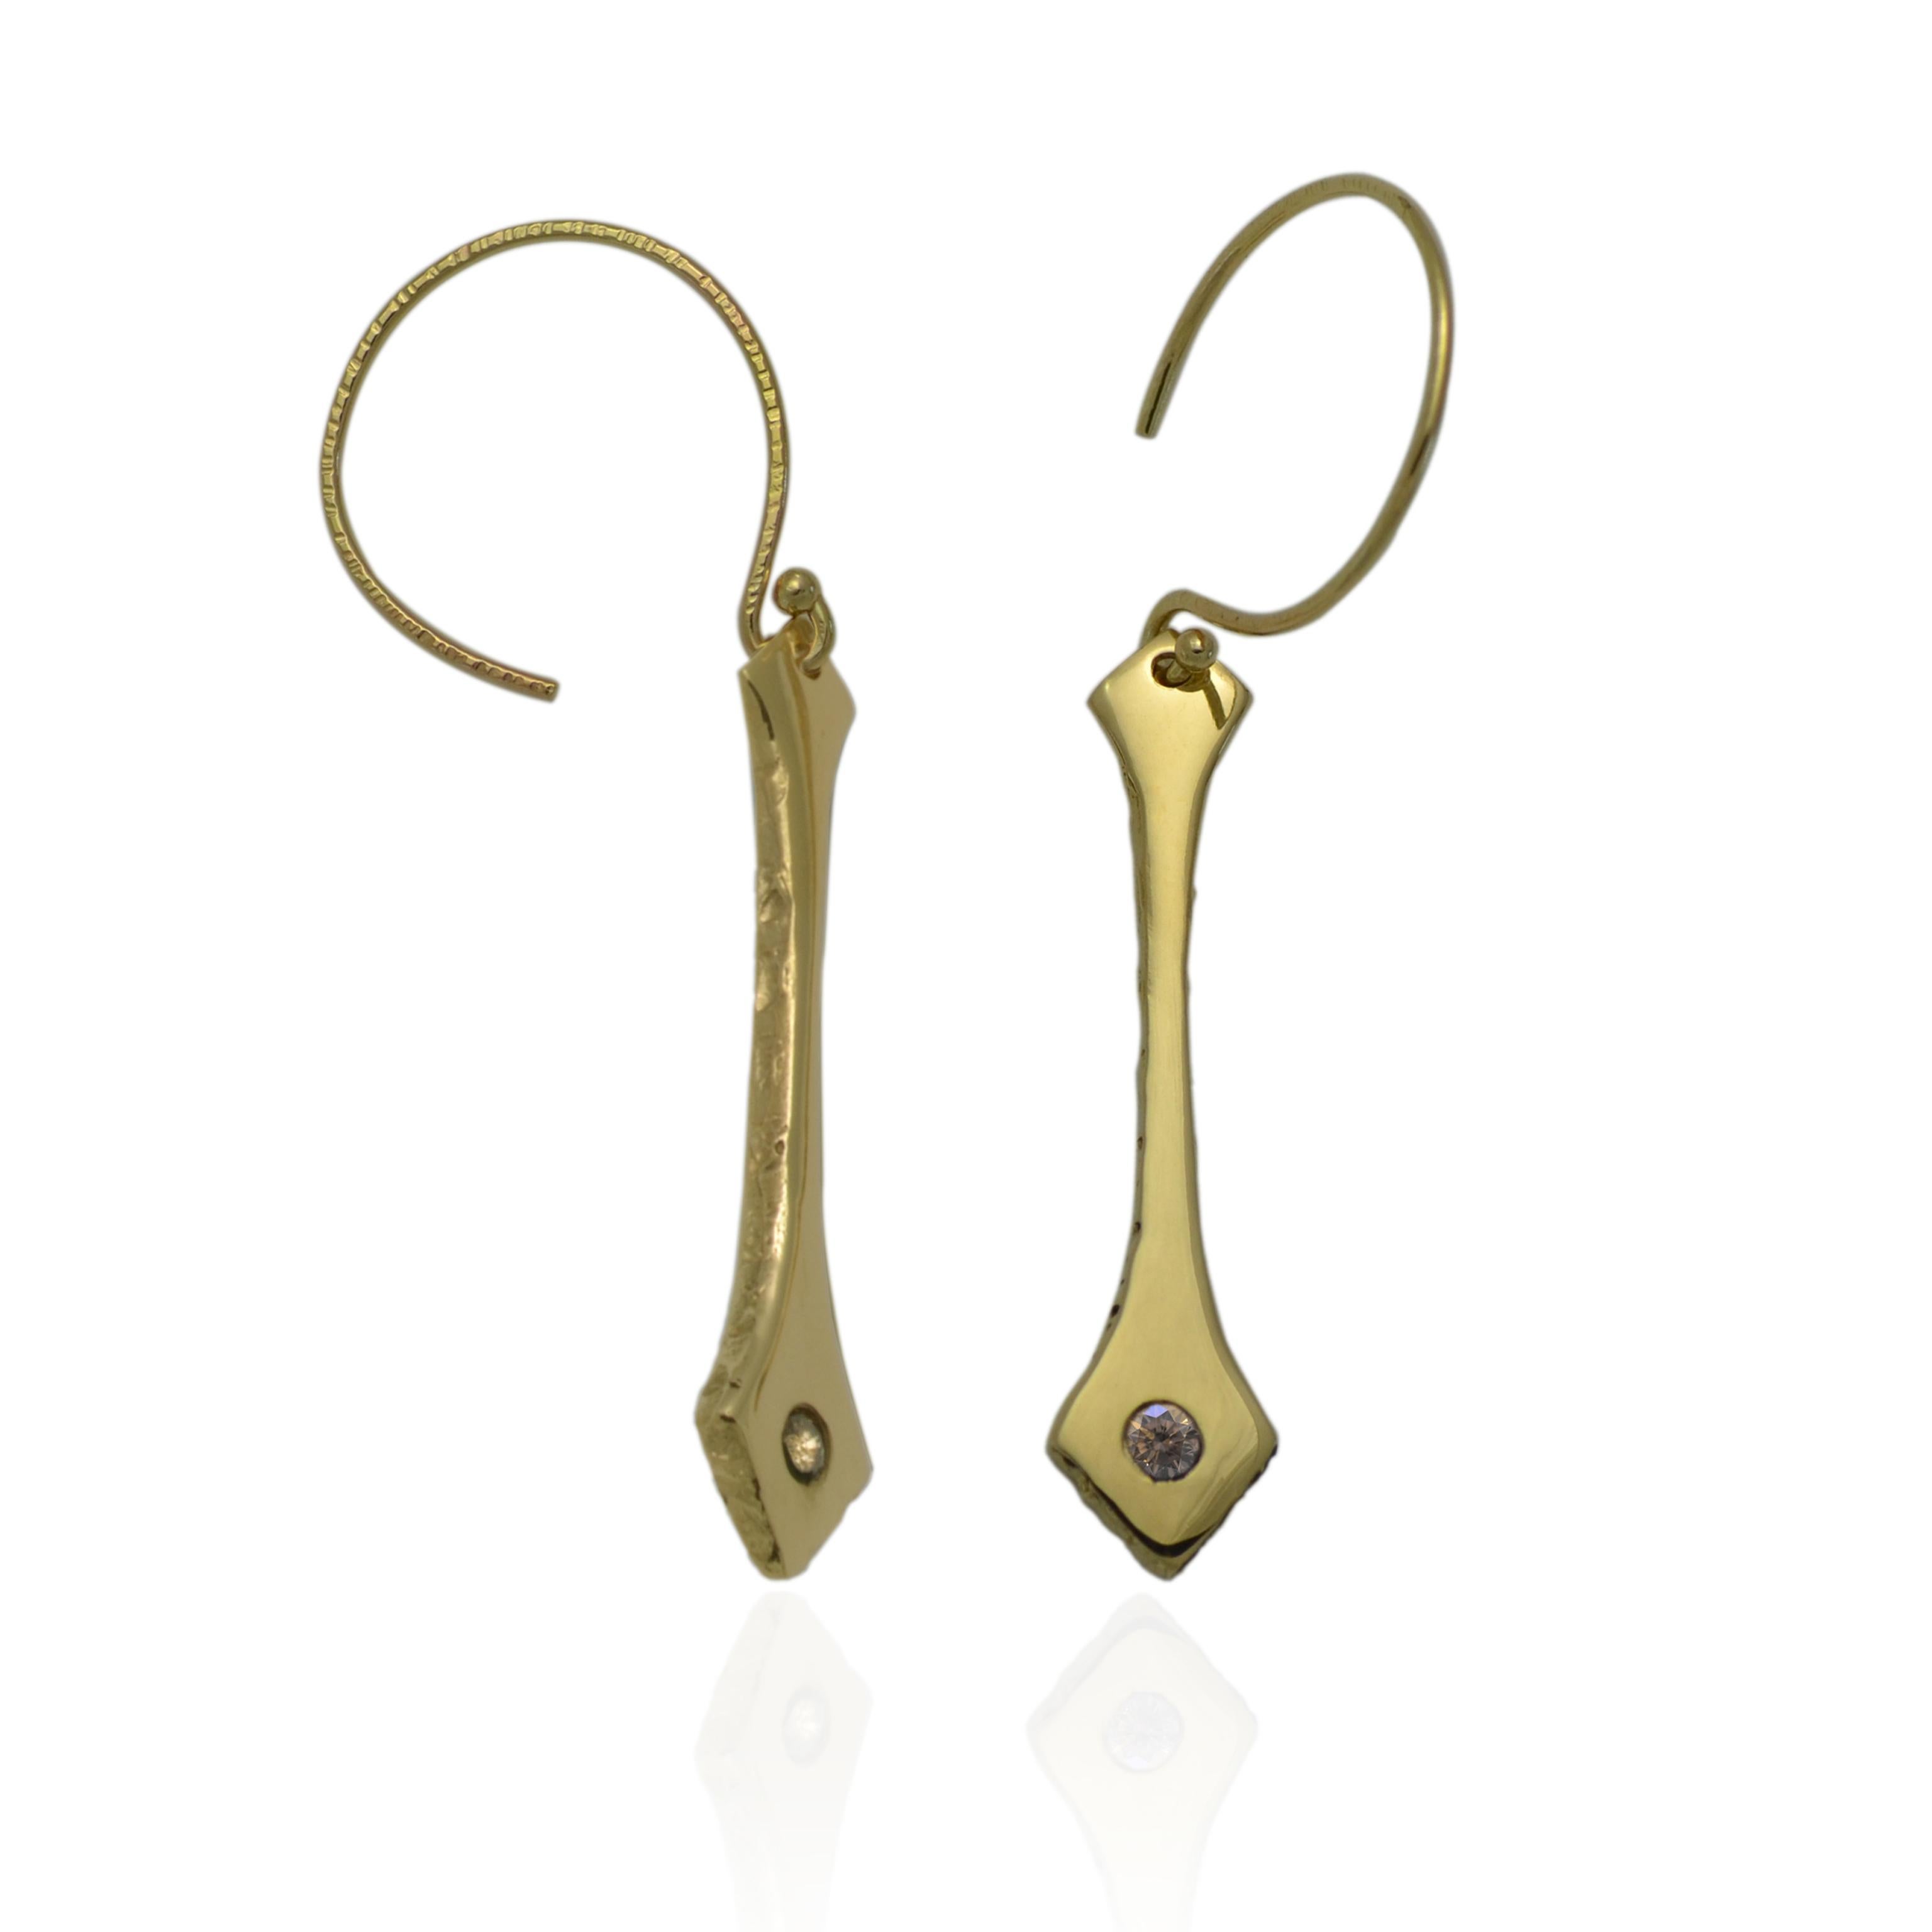 Our Yellow Gold and Champagne Colored Diamond Drop Earrings are inspired by the textures the grass makes when it is blowing on the edge of a beach sand dune fro the wind.

1.5